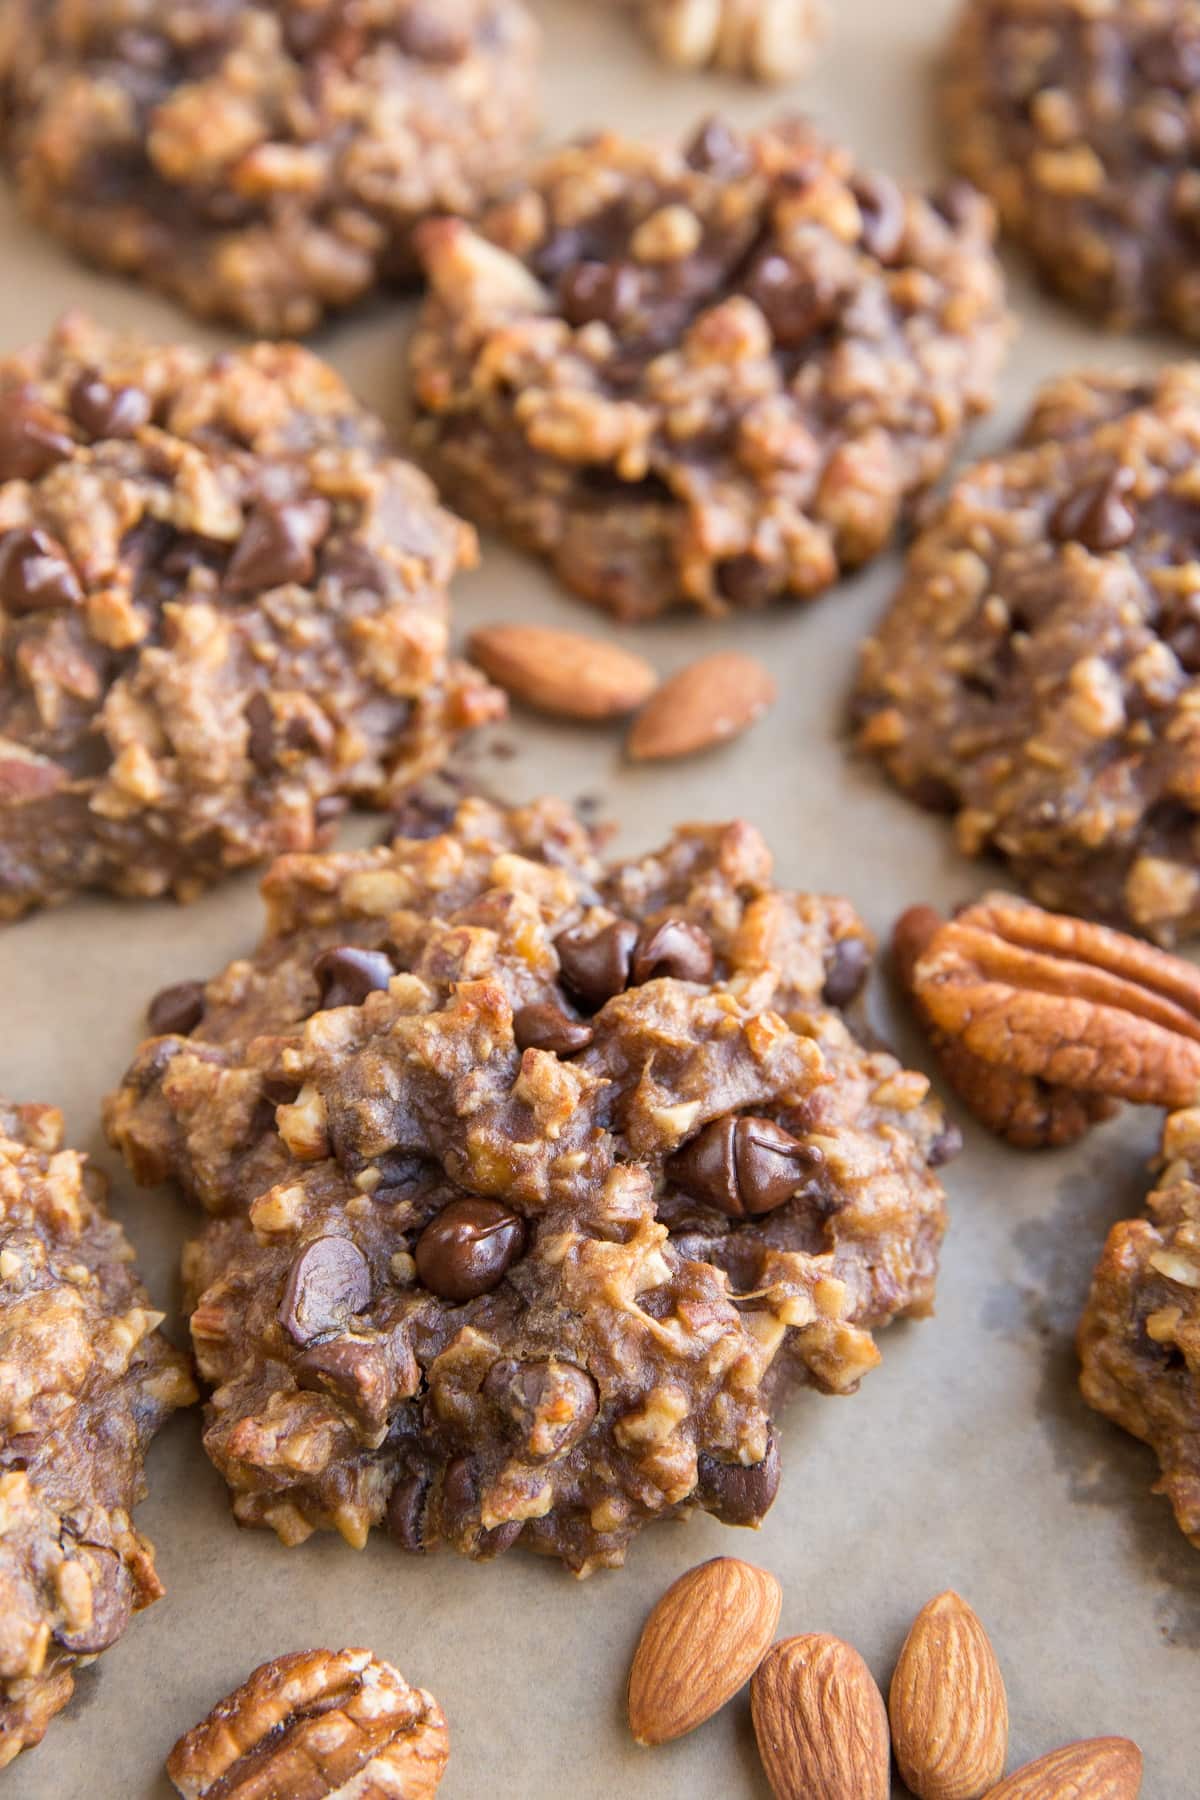 Baking sheet with nutty banana cookies with raw almonds and pecans next to the cookies